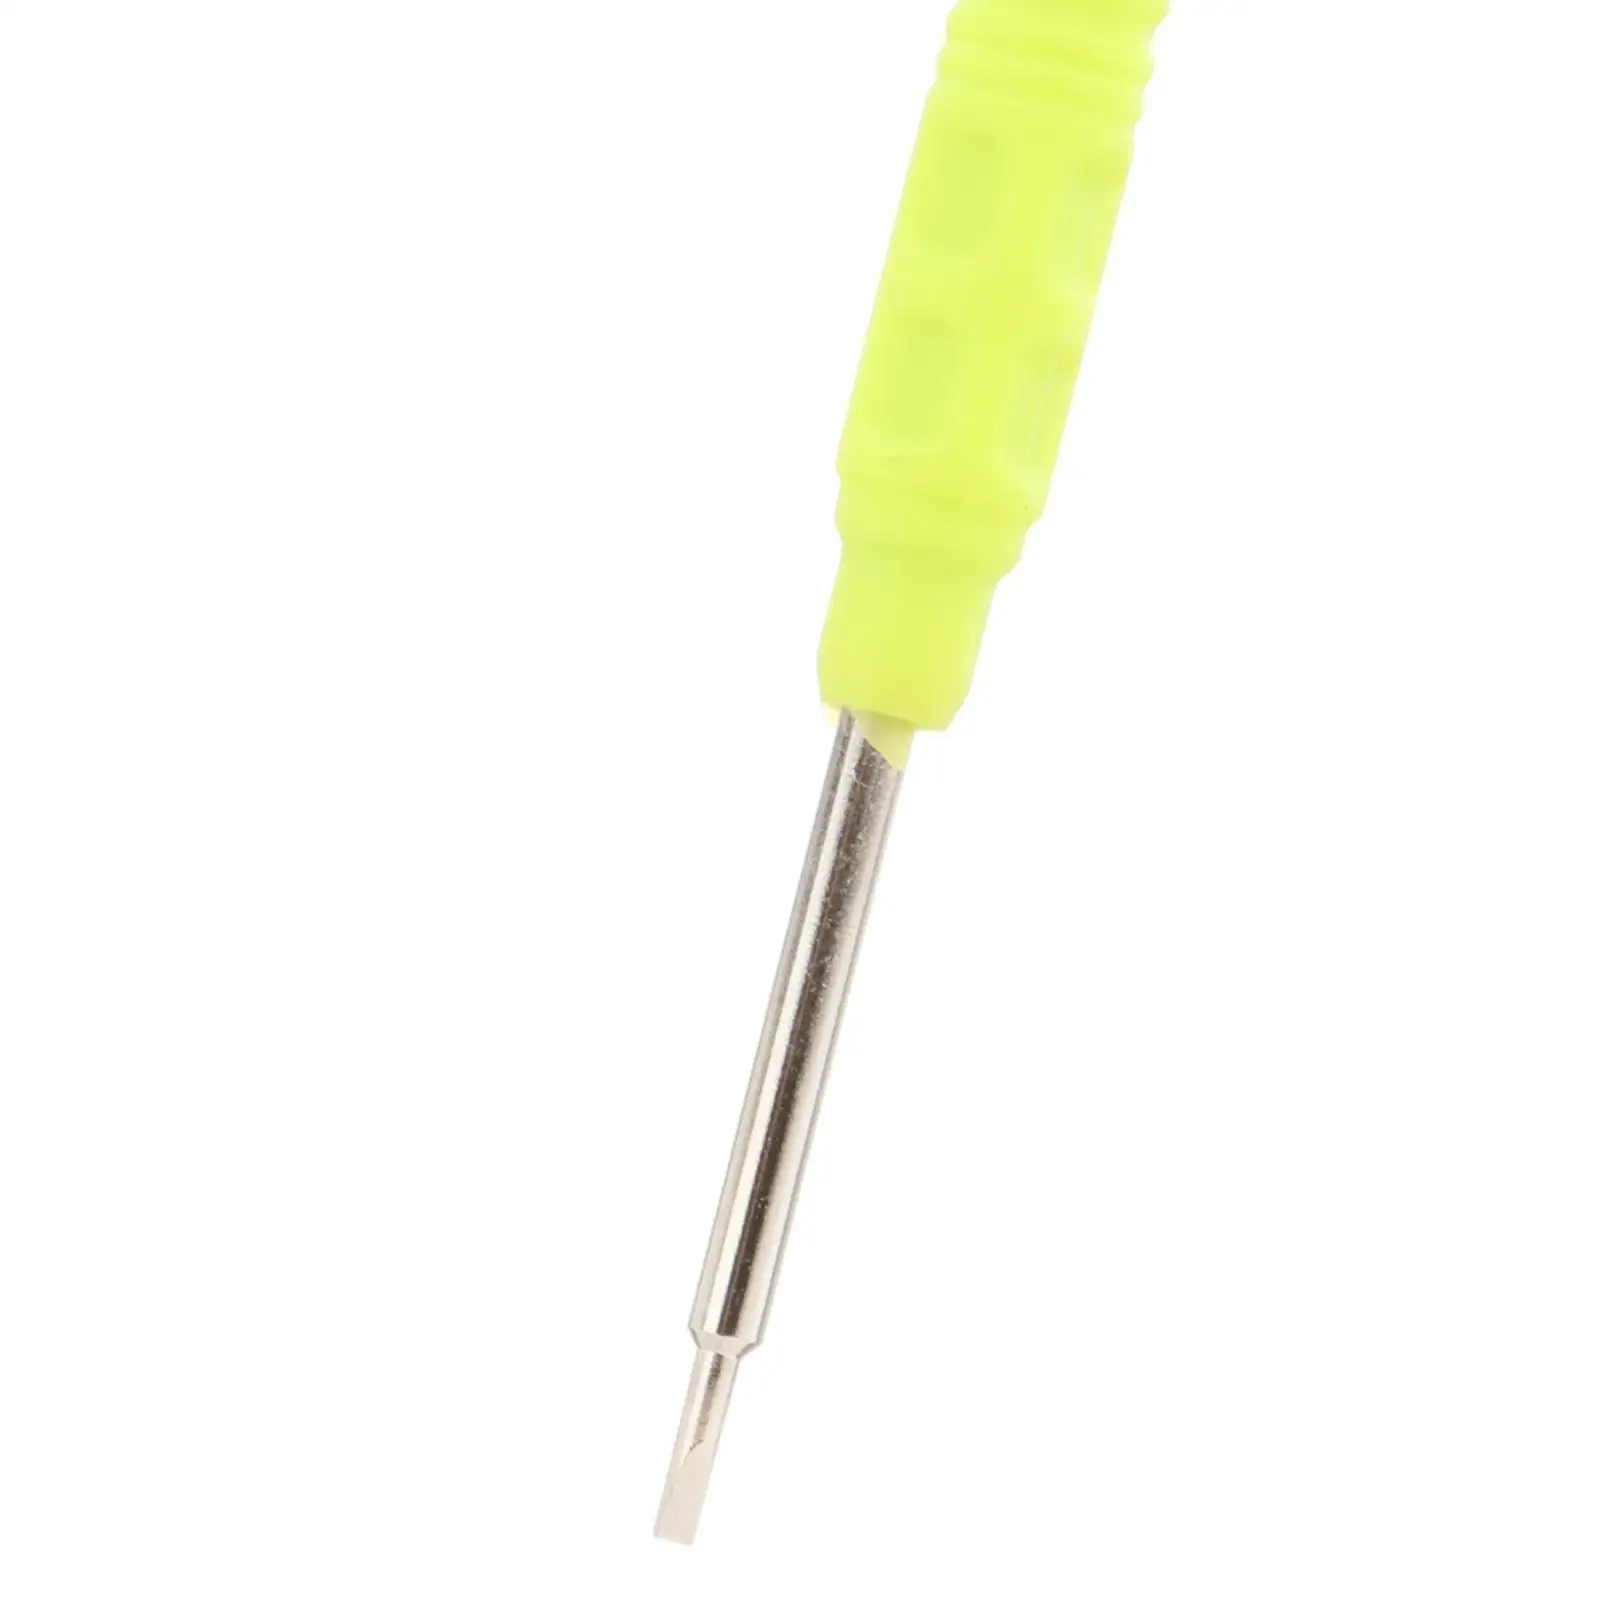 Epee Fencing Screwdriver Maintenance Tool Easy to Use Professional Durable for Epee Foil Competitions Fencing Accessories